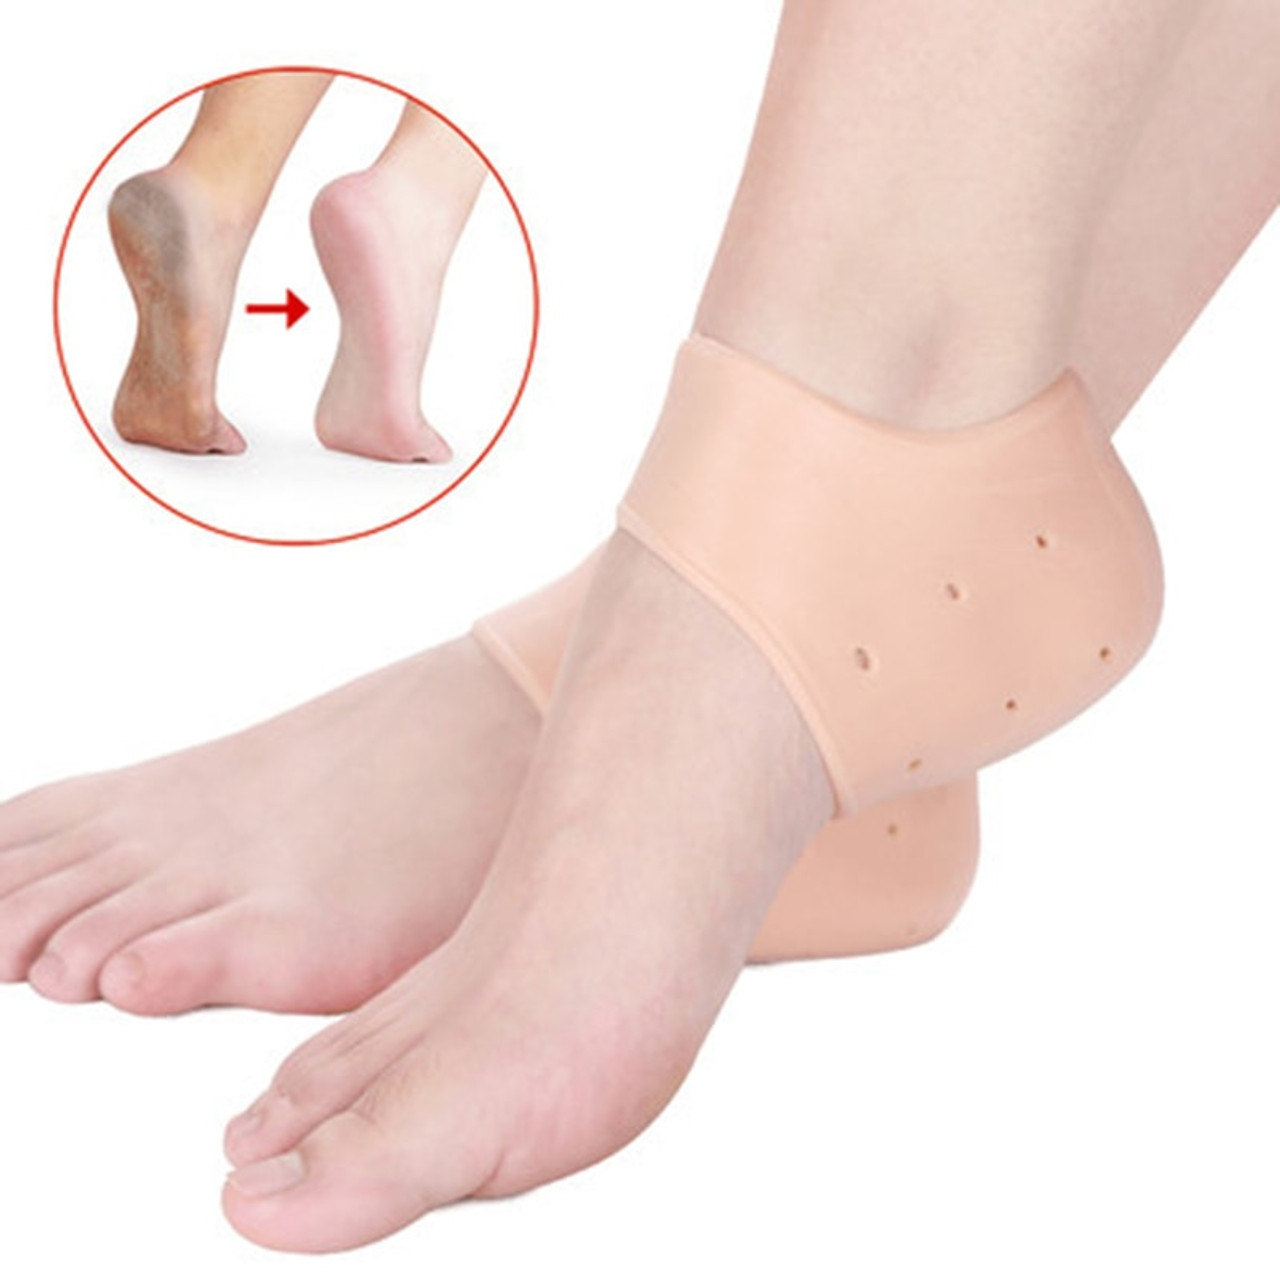 foot pain and cracking